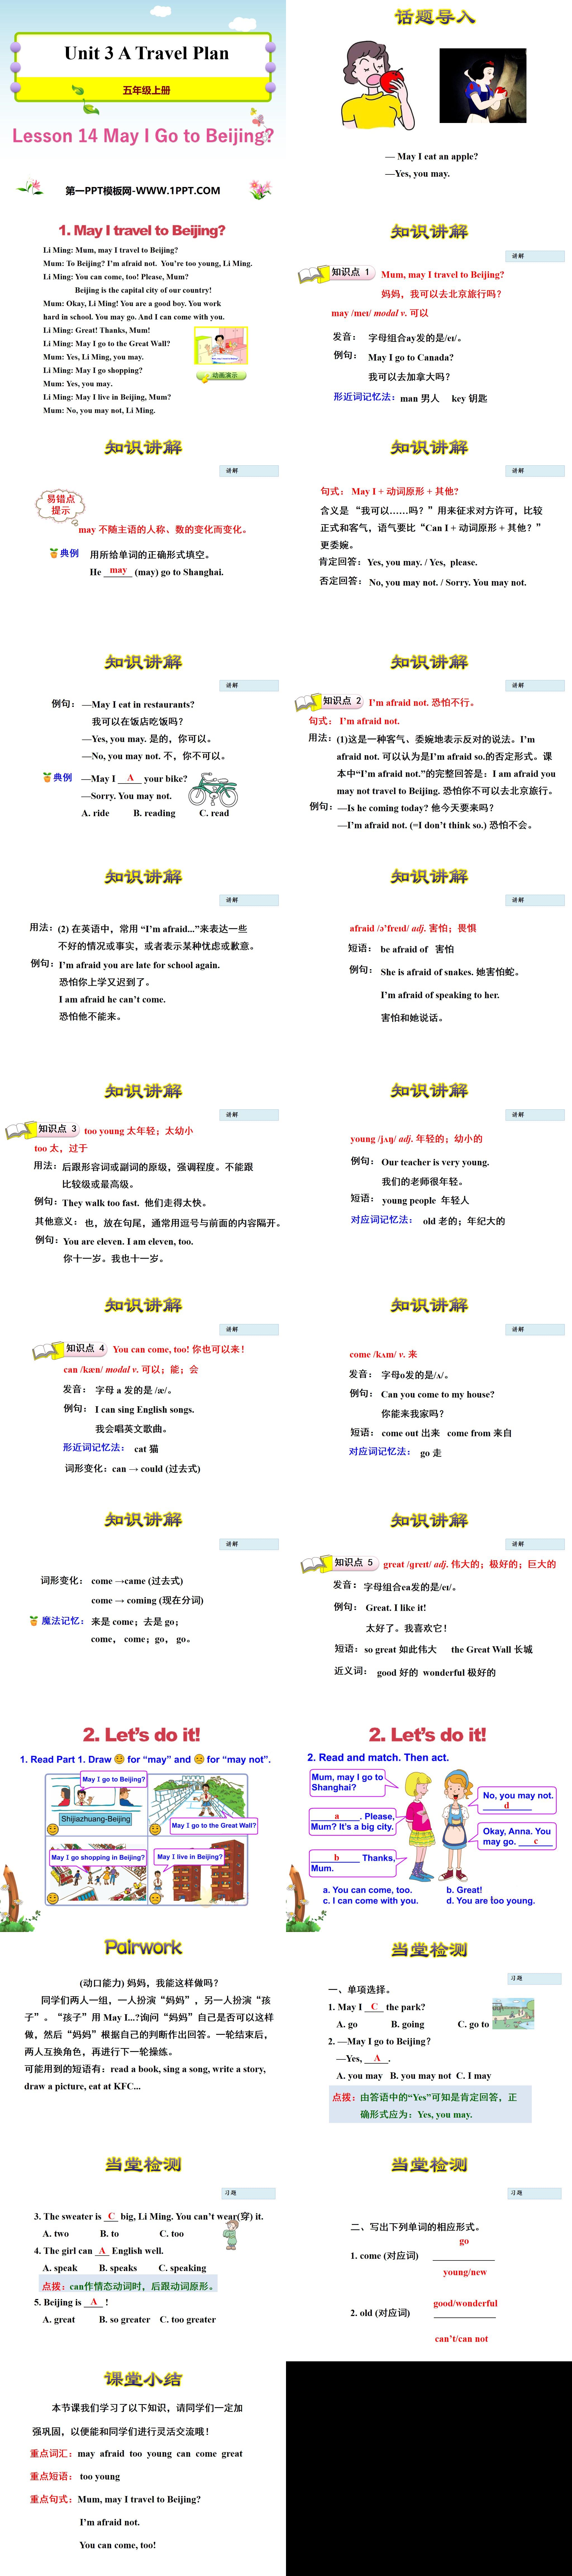 《May I Go to Beijing?》A Travel Plan PPT教学课件
（2）